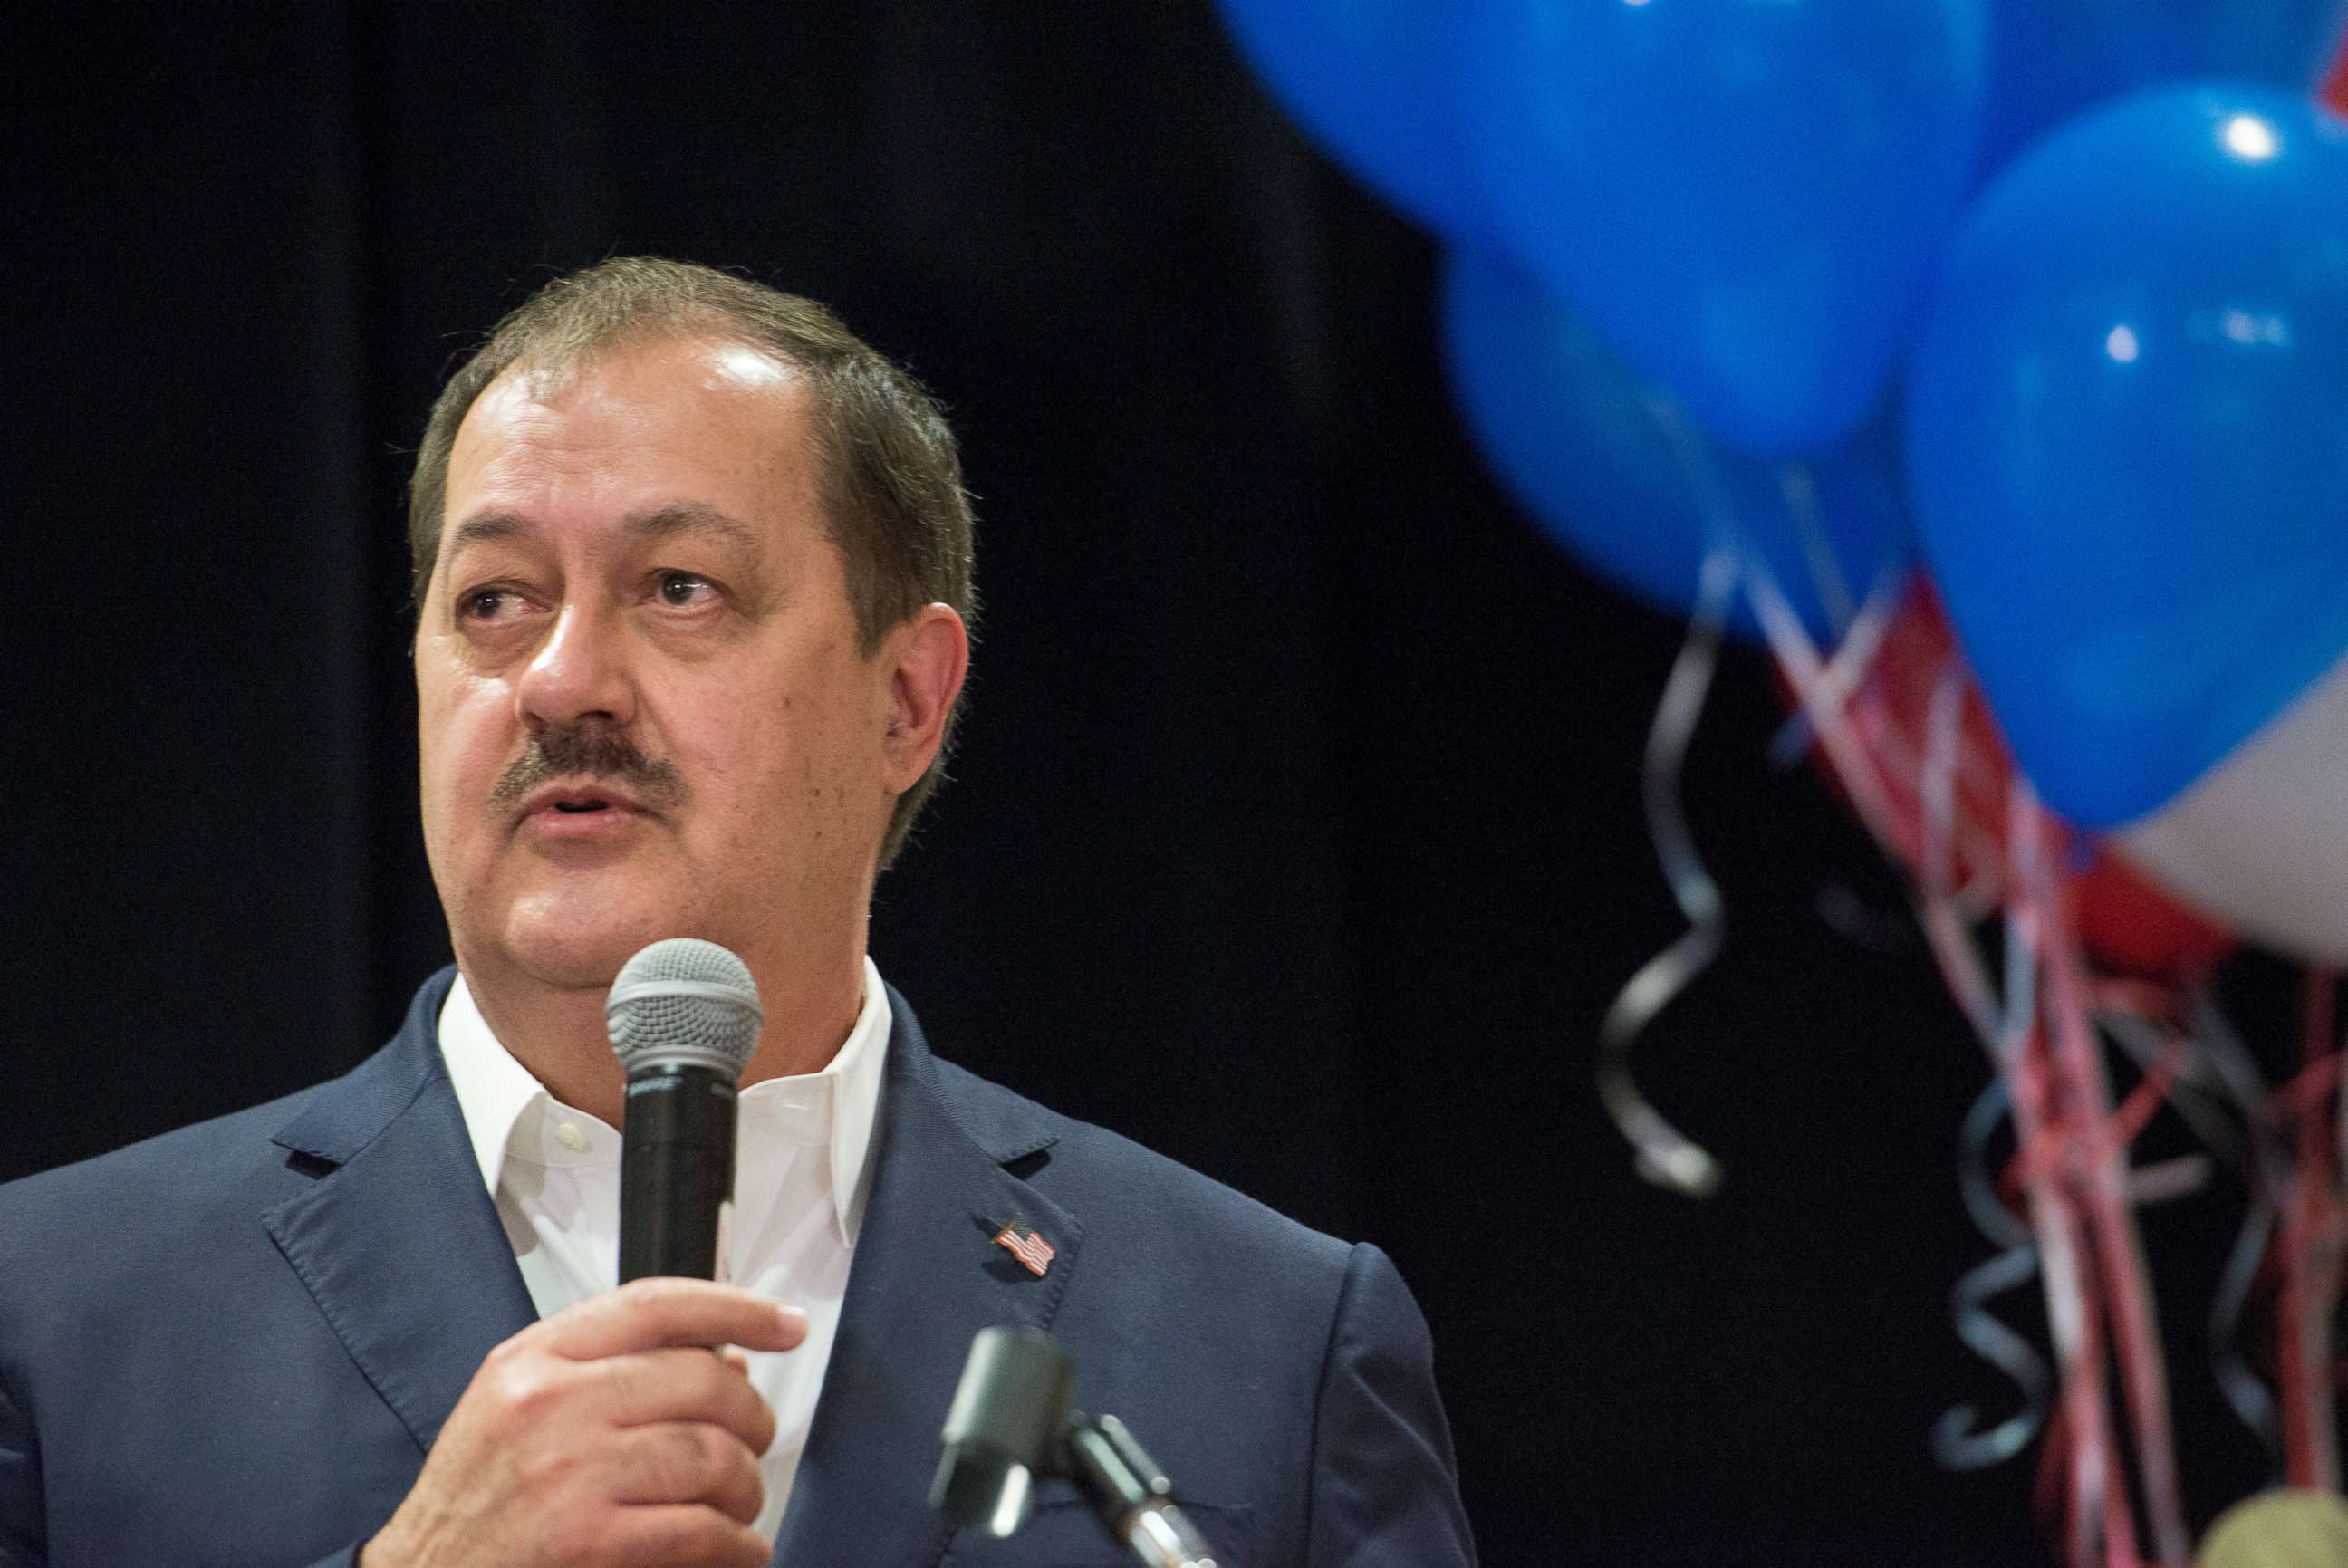 PHOTO: Republican U.S. Senate candidate Don Blankenship speaks to his supporters during the primary election in Charleston, West Virginia, May 8, 2018.